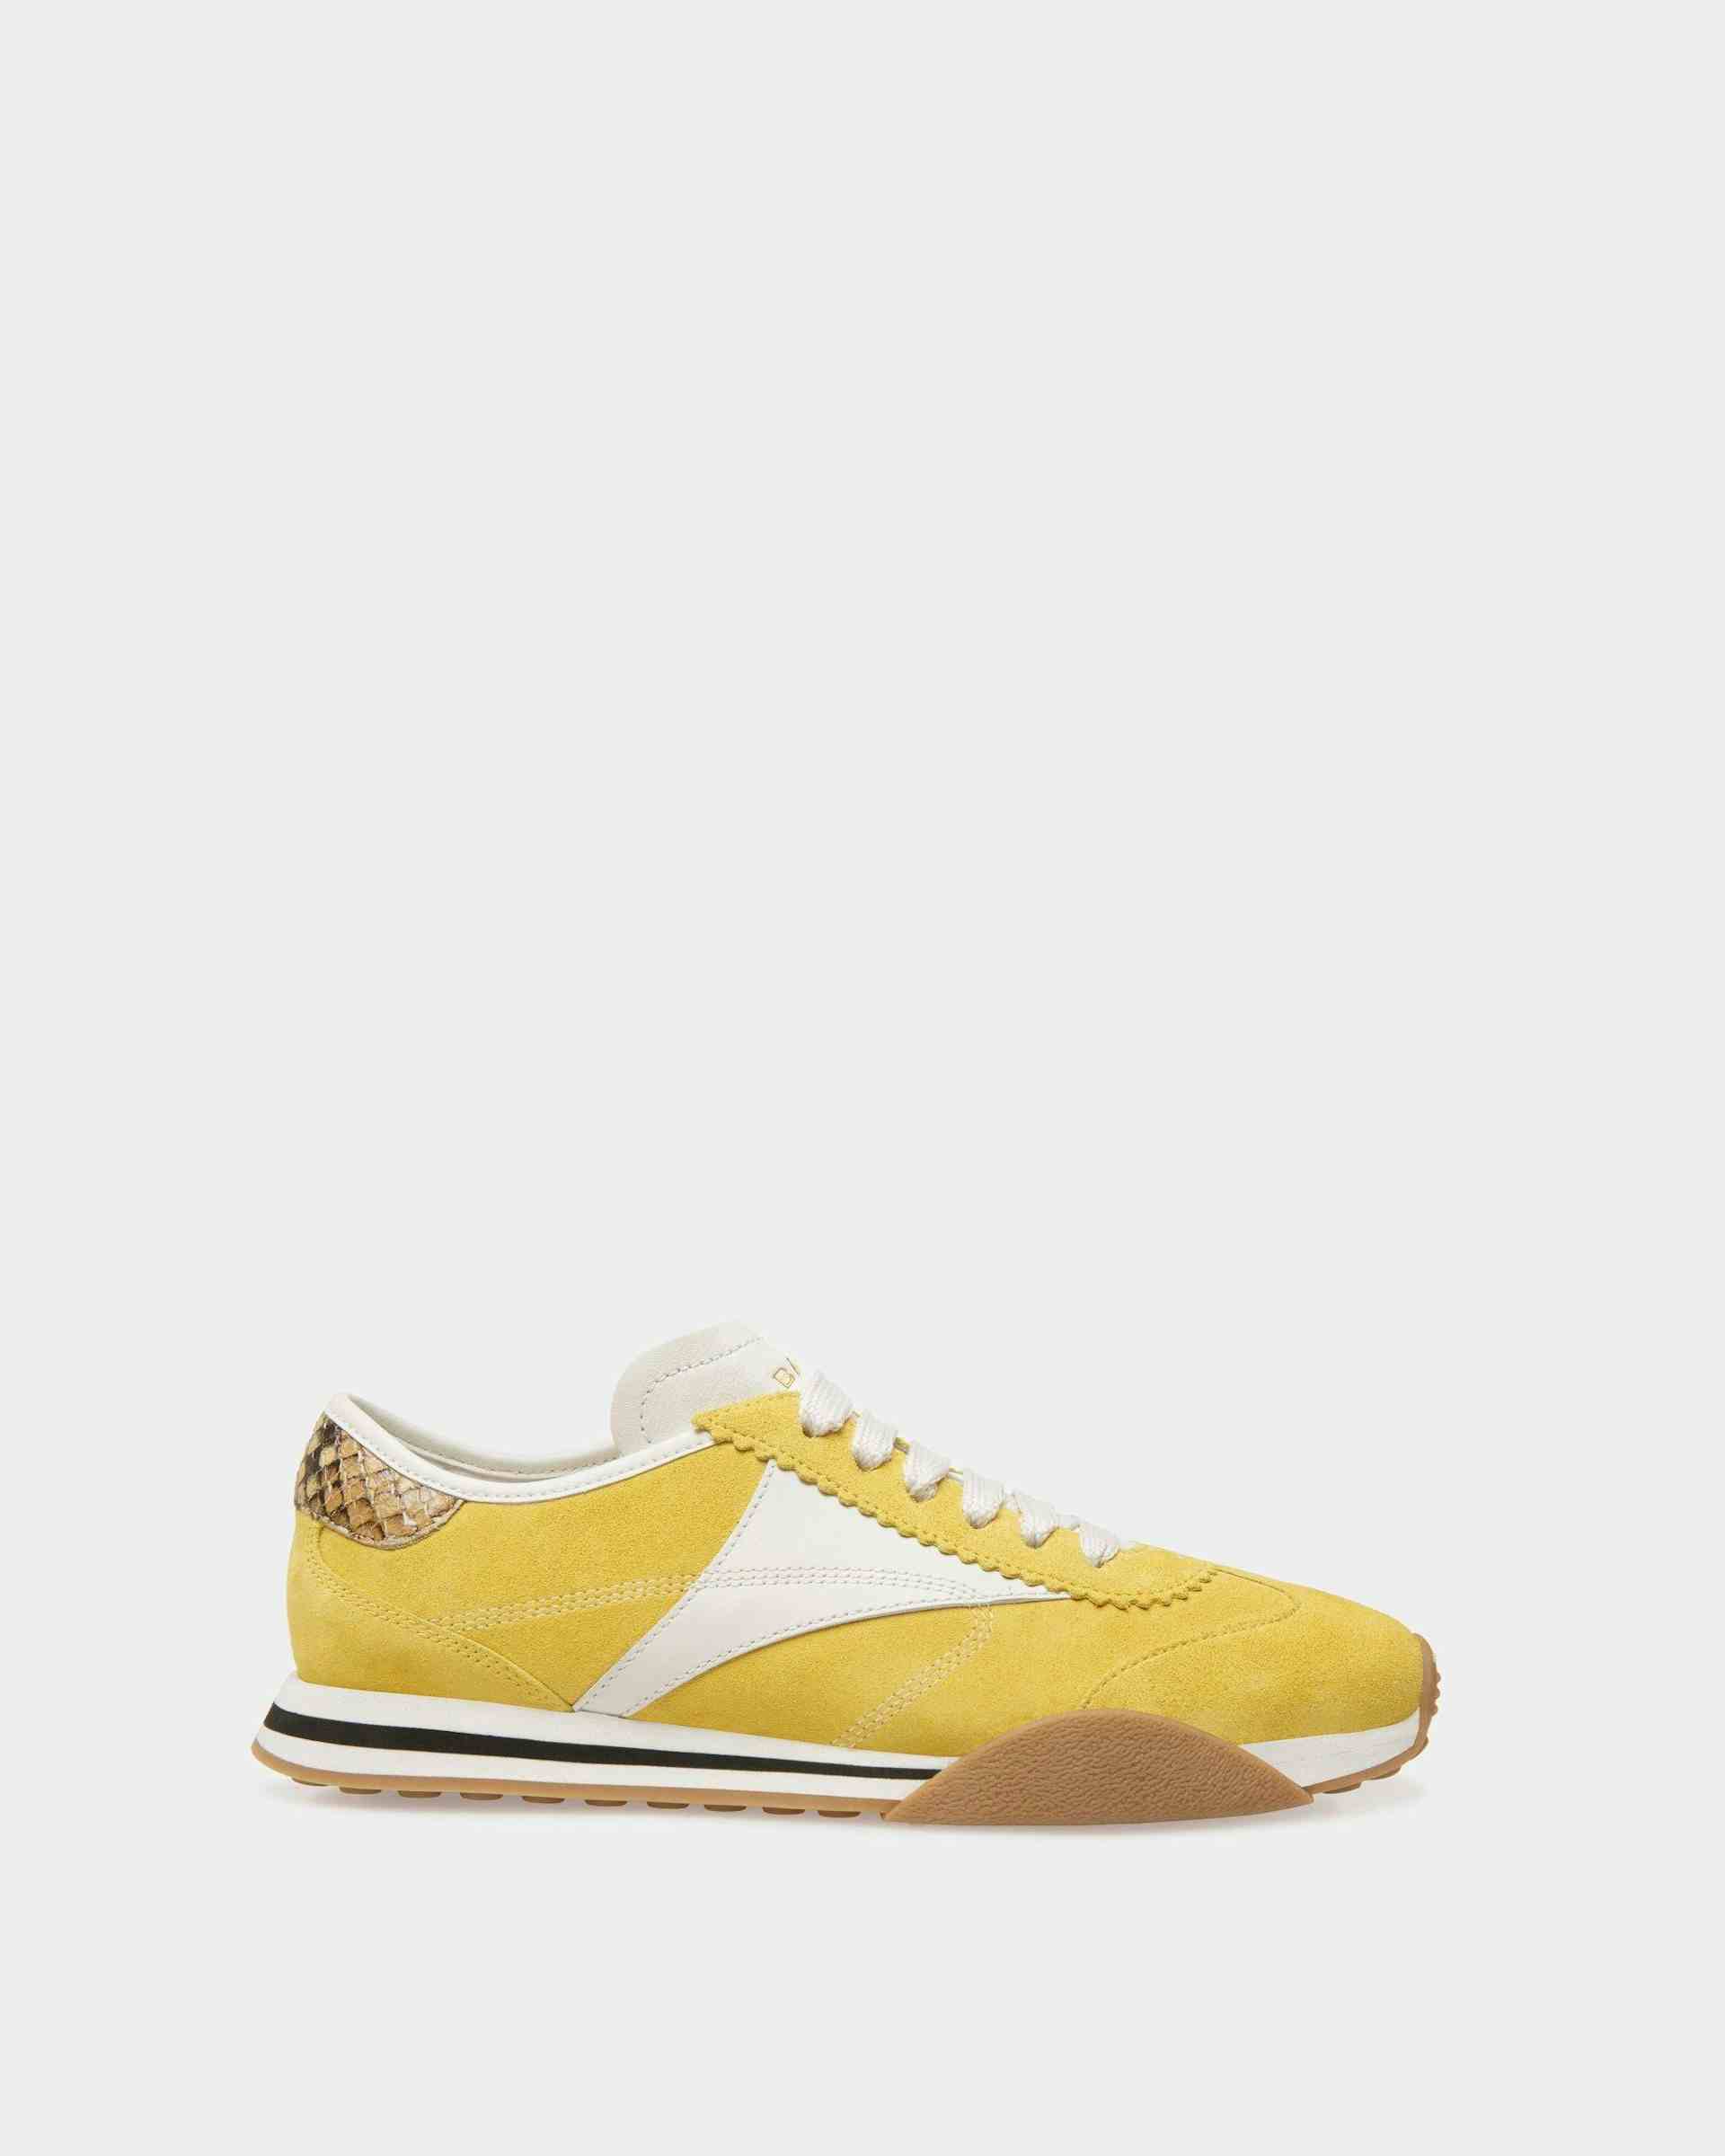 Sussex Sneakers In Yellow And White Leather - Women's - Bally